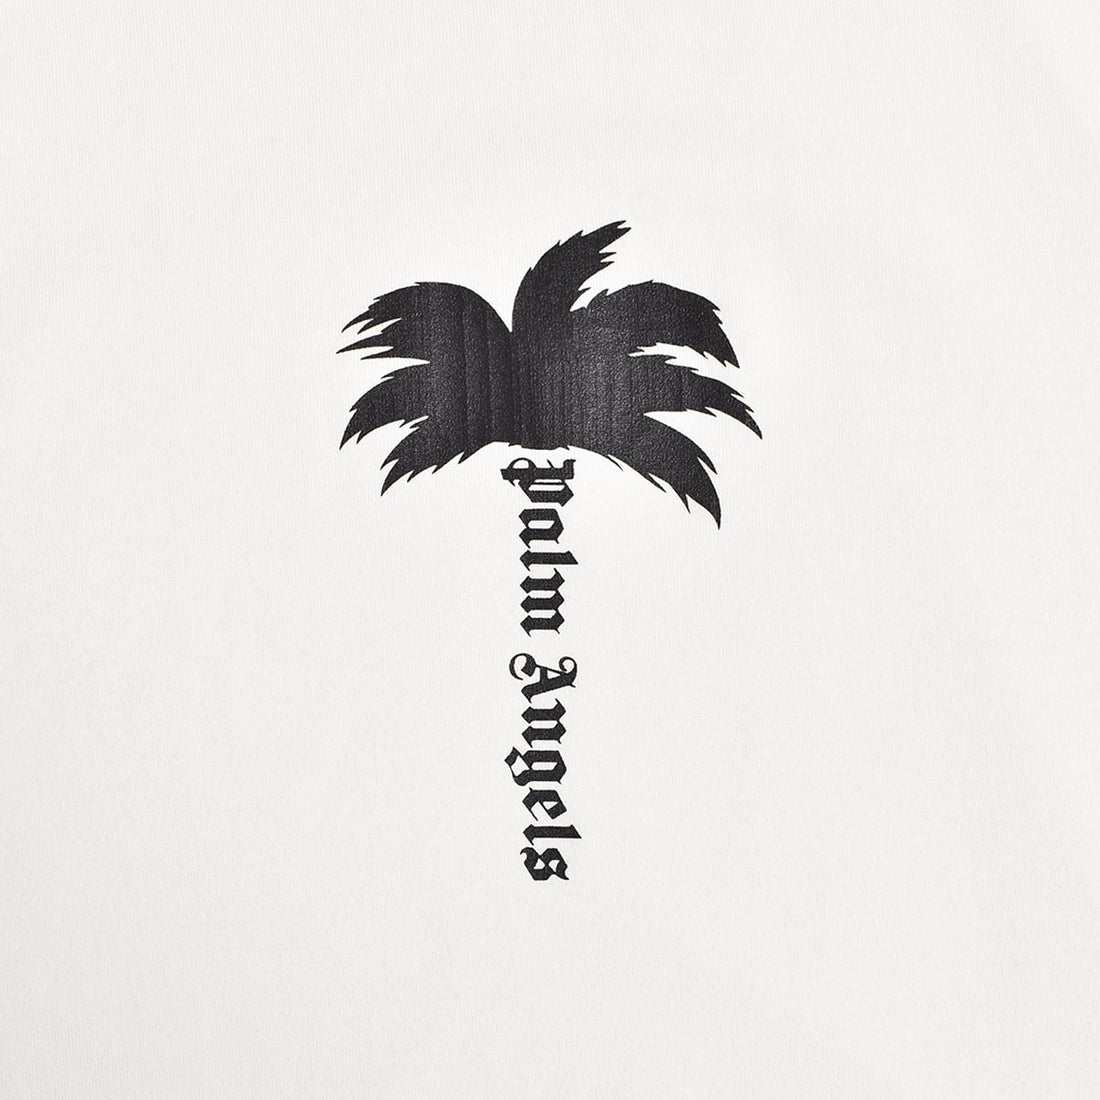 [Palm Angels]THE PALM TEE/OFF WHITE(PMAS24-001)